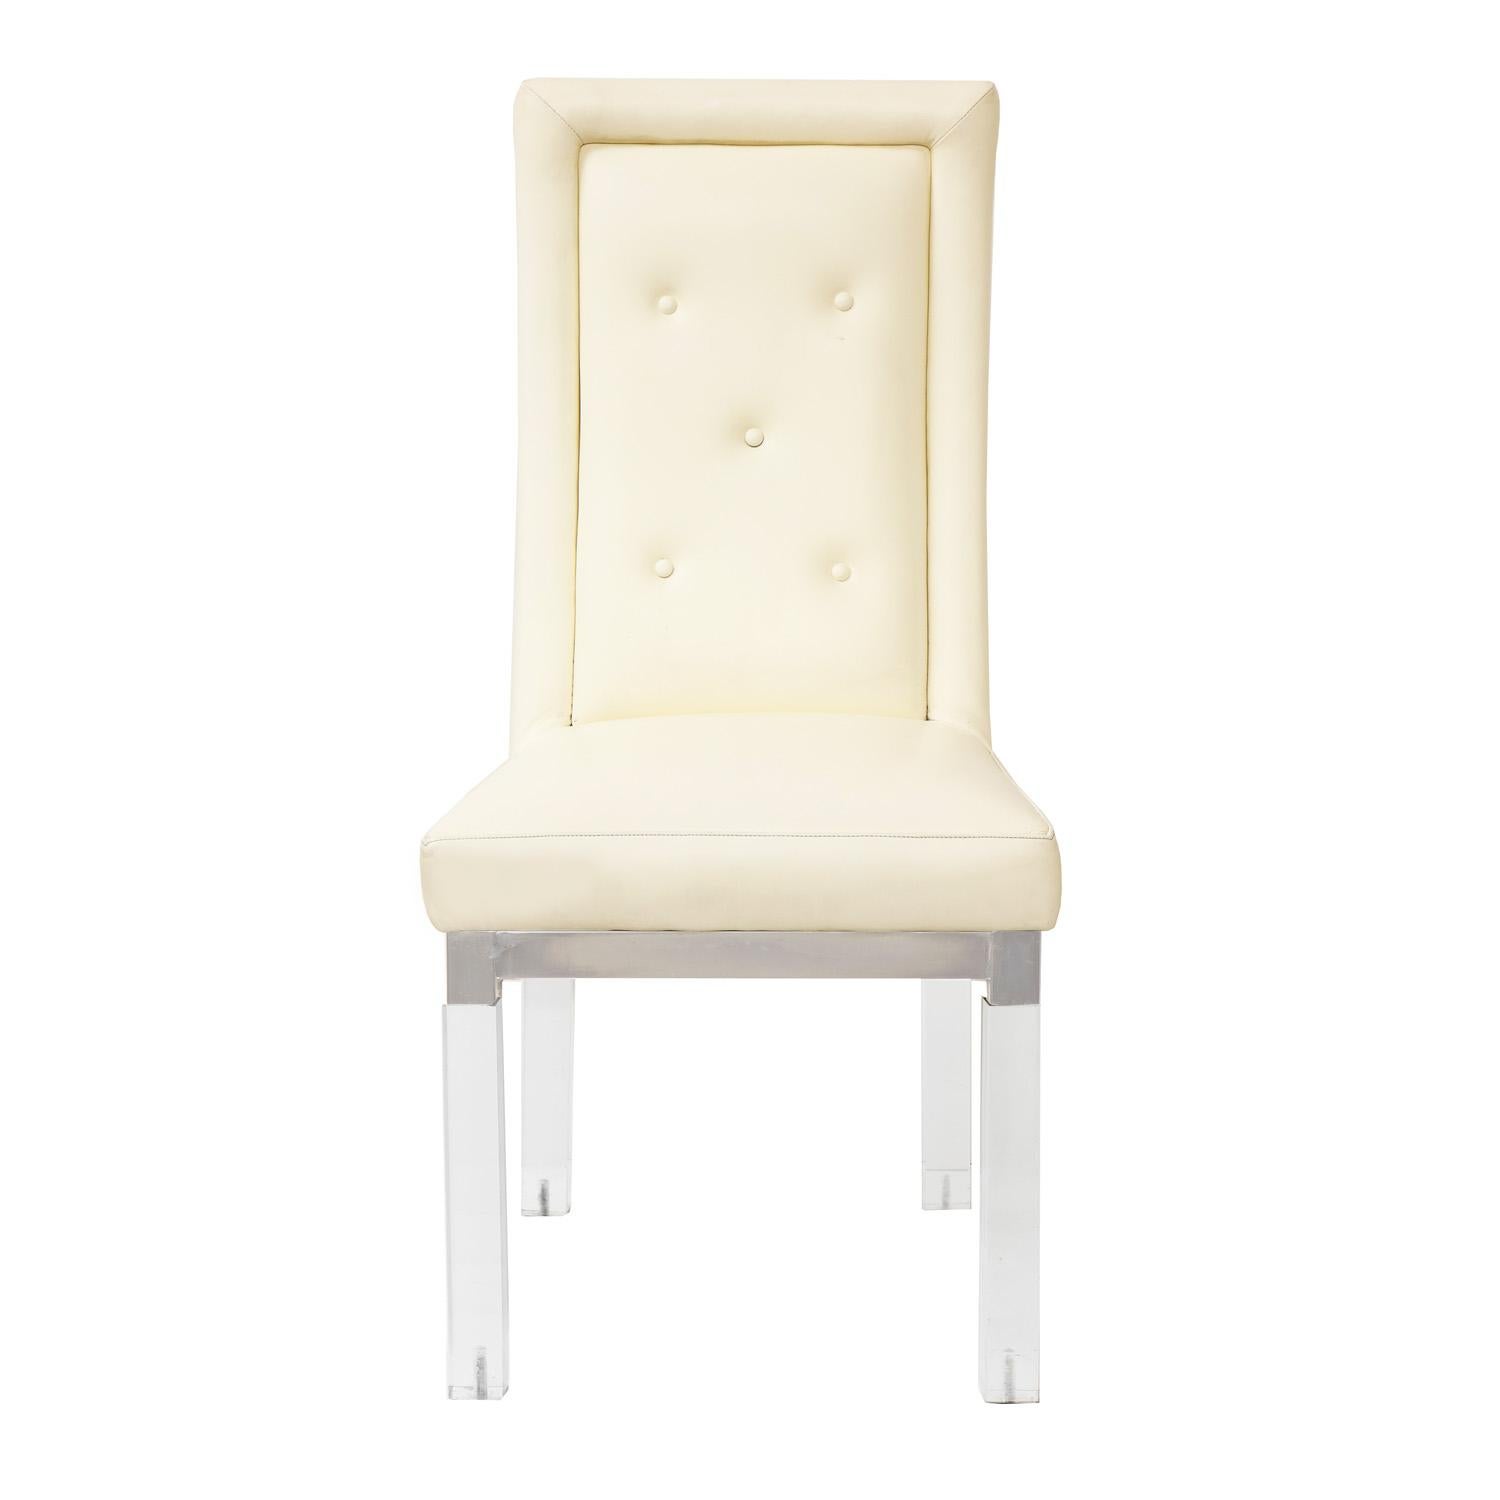 Set of 8 dining dining chairs upholstered in cream color leather with Lucite legs and polished nickel fittings by Charles Hollis Jones. American 1970's.